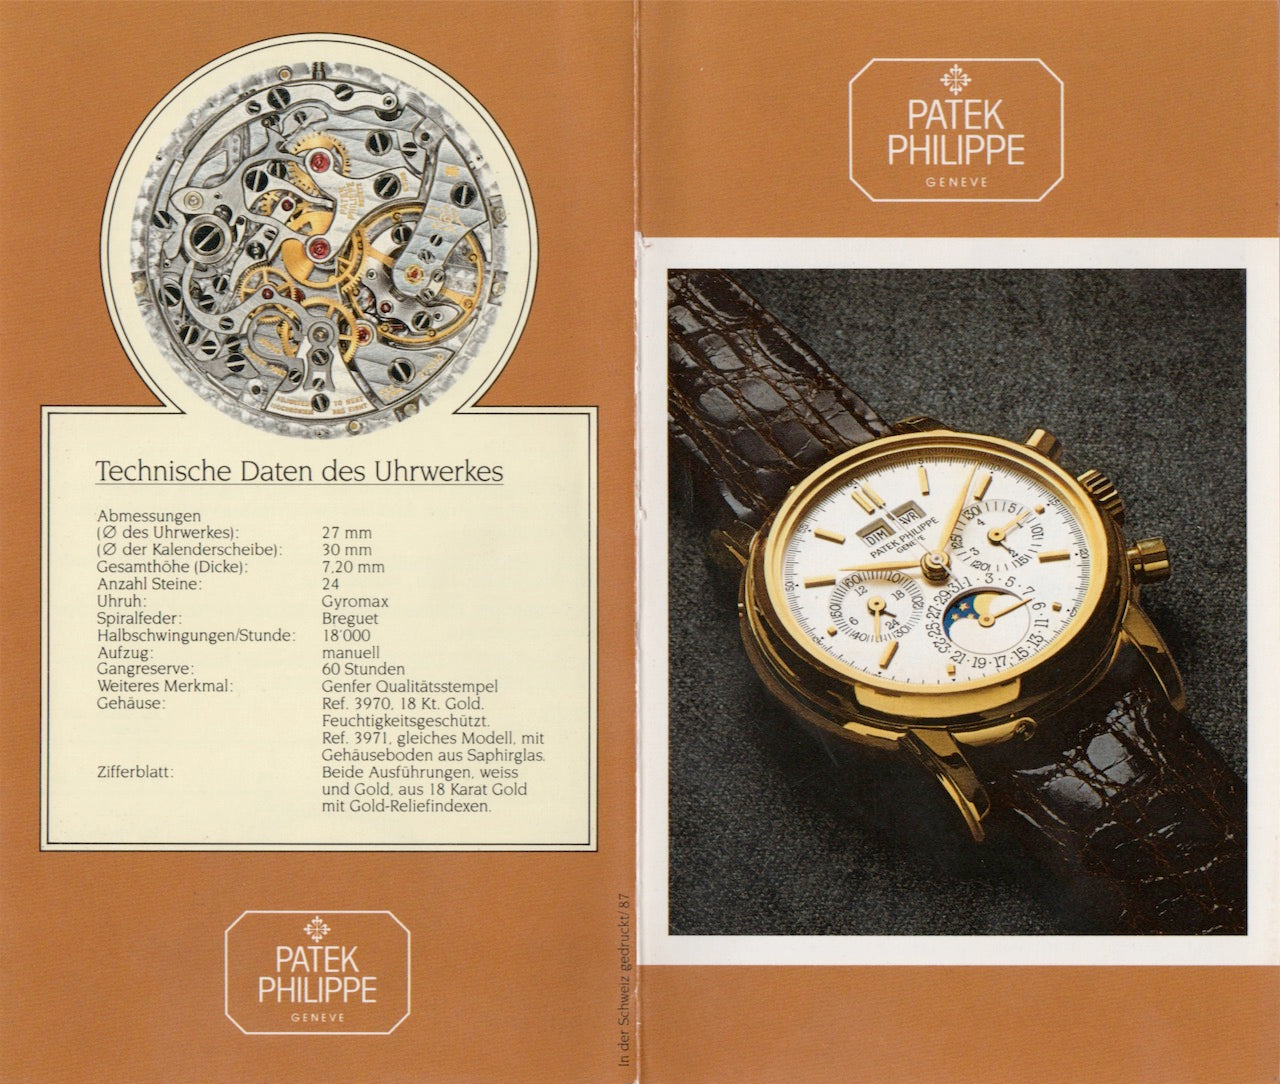 Patek Philippe Prices & Watch Models (Buying Guide)